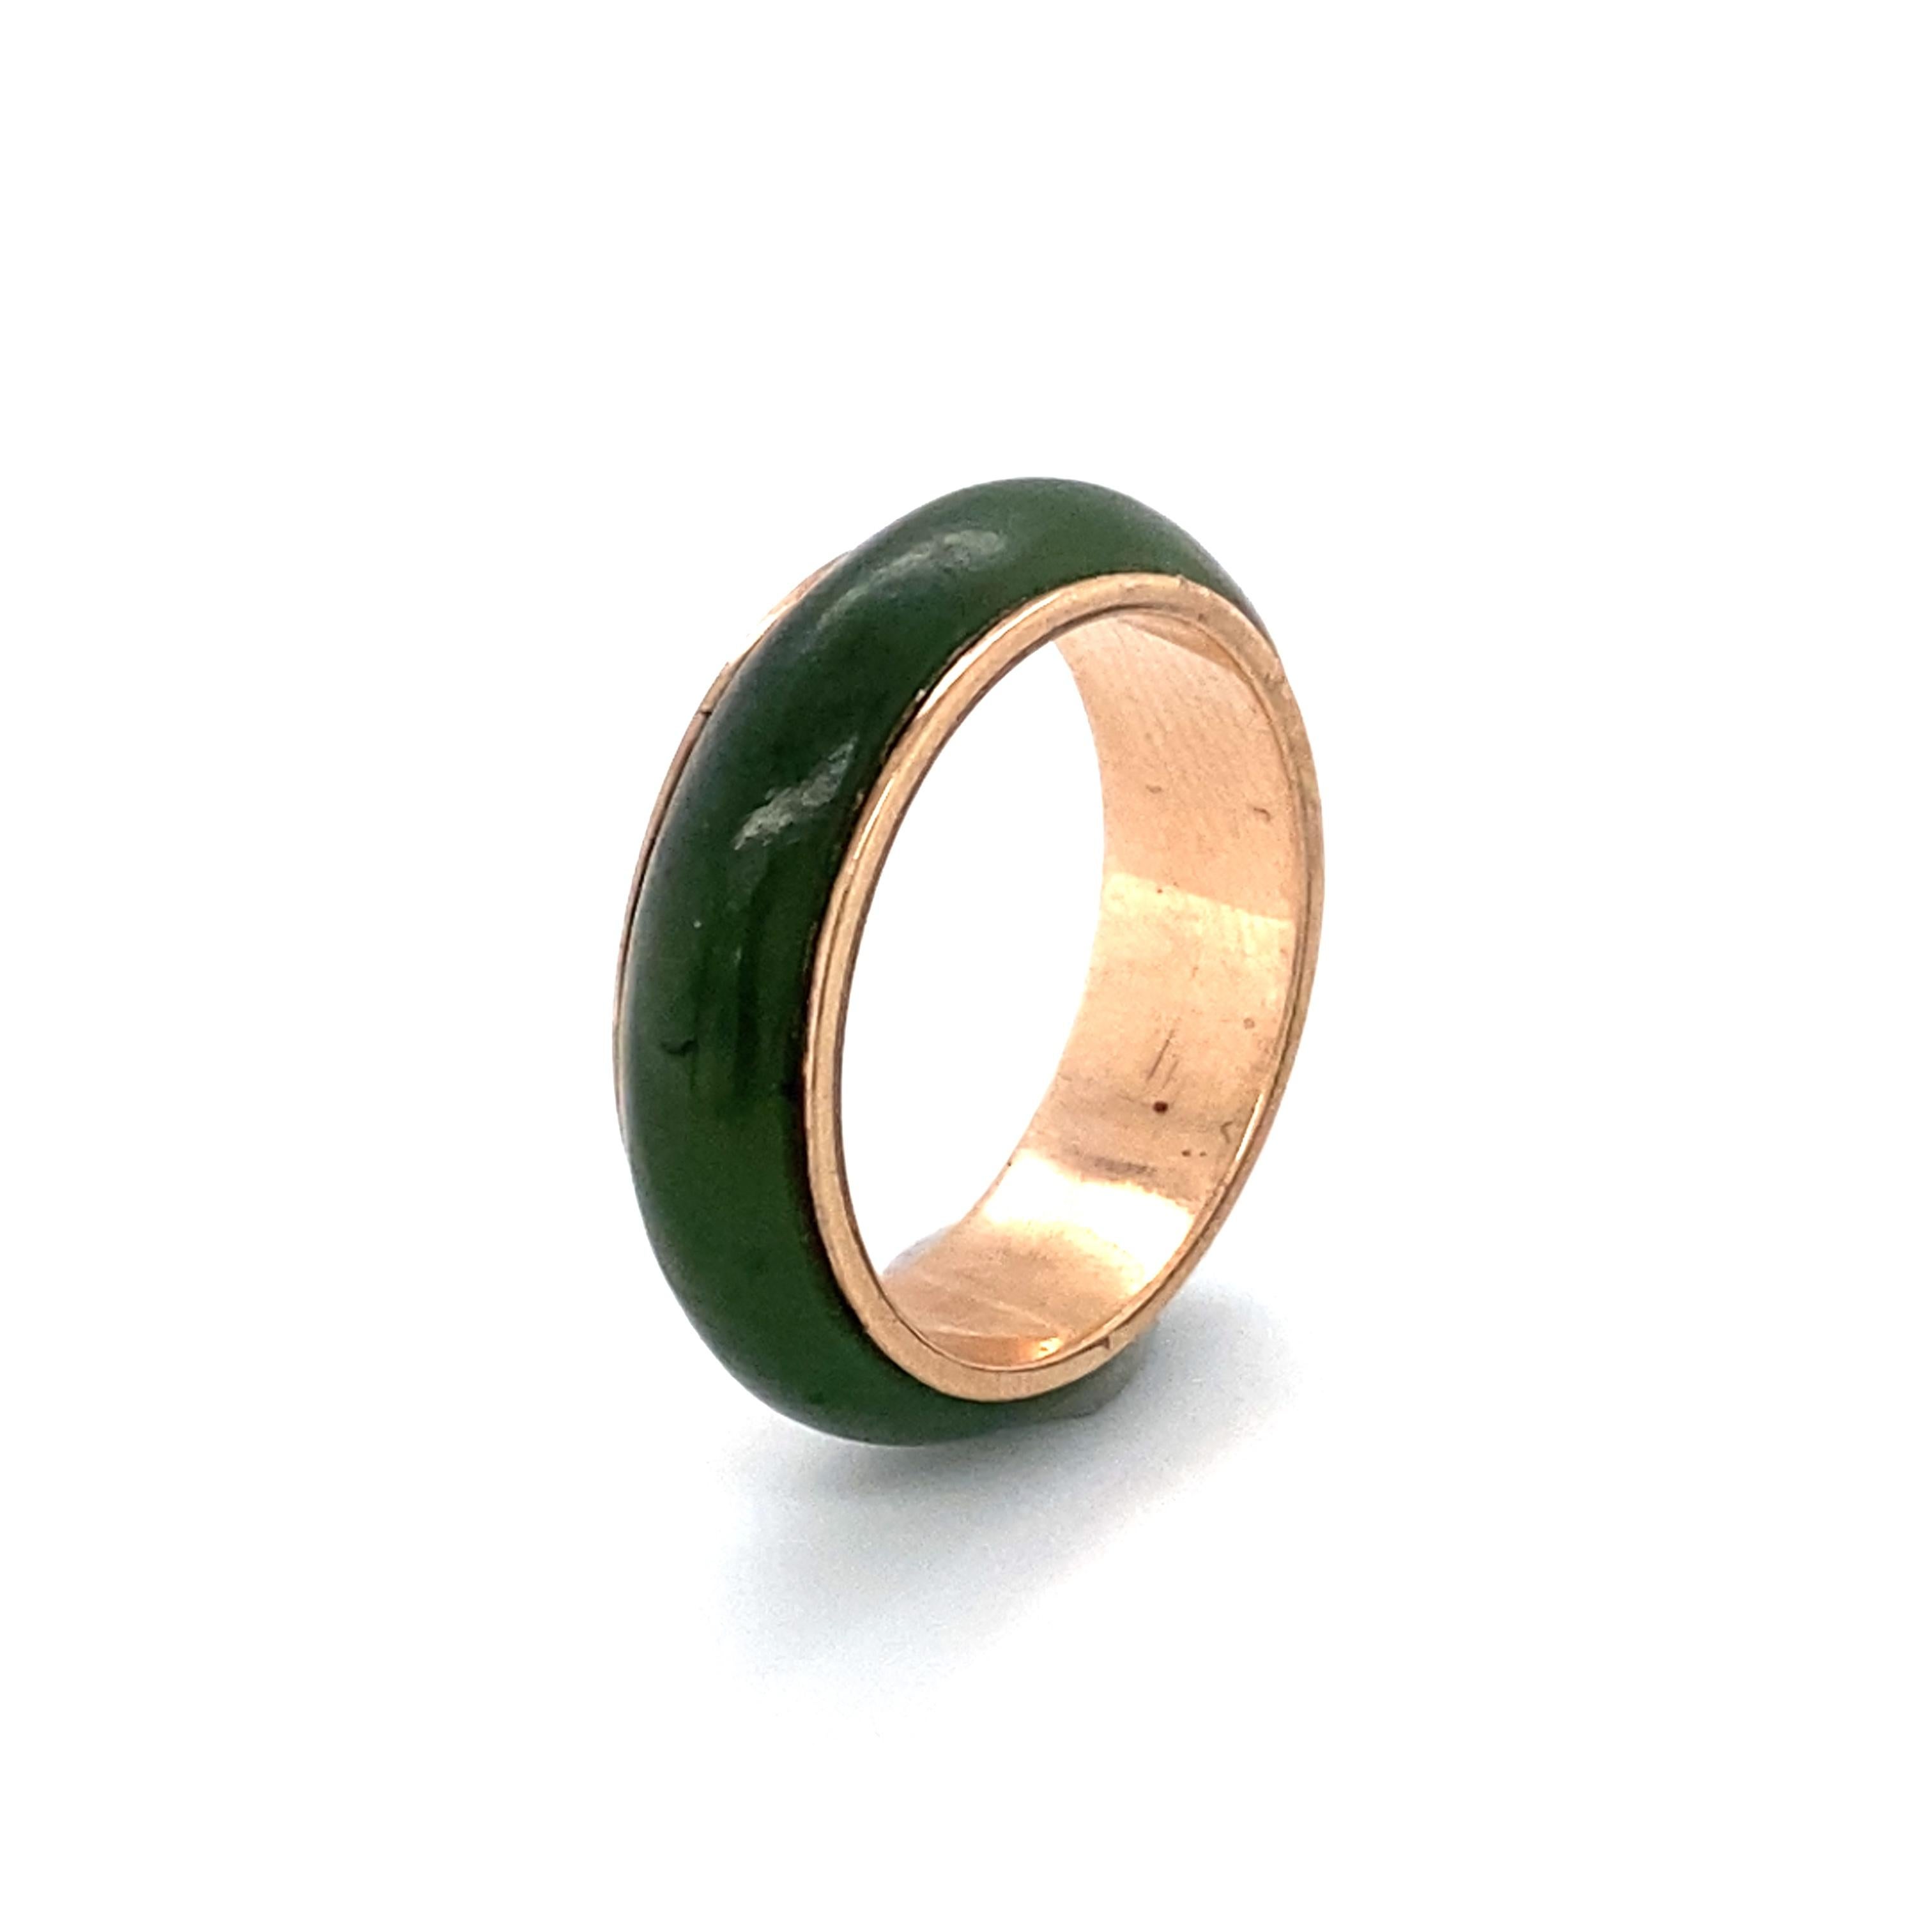 Item Details:
Gemstone: Jade
Metal type: 14 Karat Rose Gold 
Weight: 3.4grams 
Size: 6.75

Item Features:
Features one solid piece of Jade carved to fit around a 14 karat rose gold band ring. This ring is a perfect example of simple yet elegant.